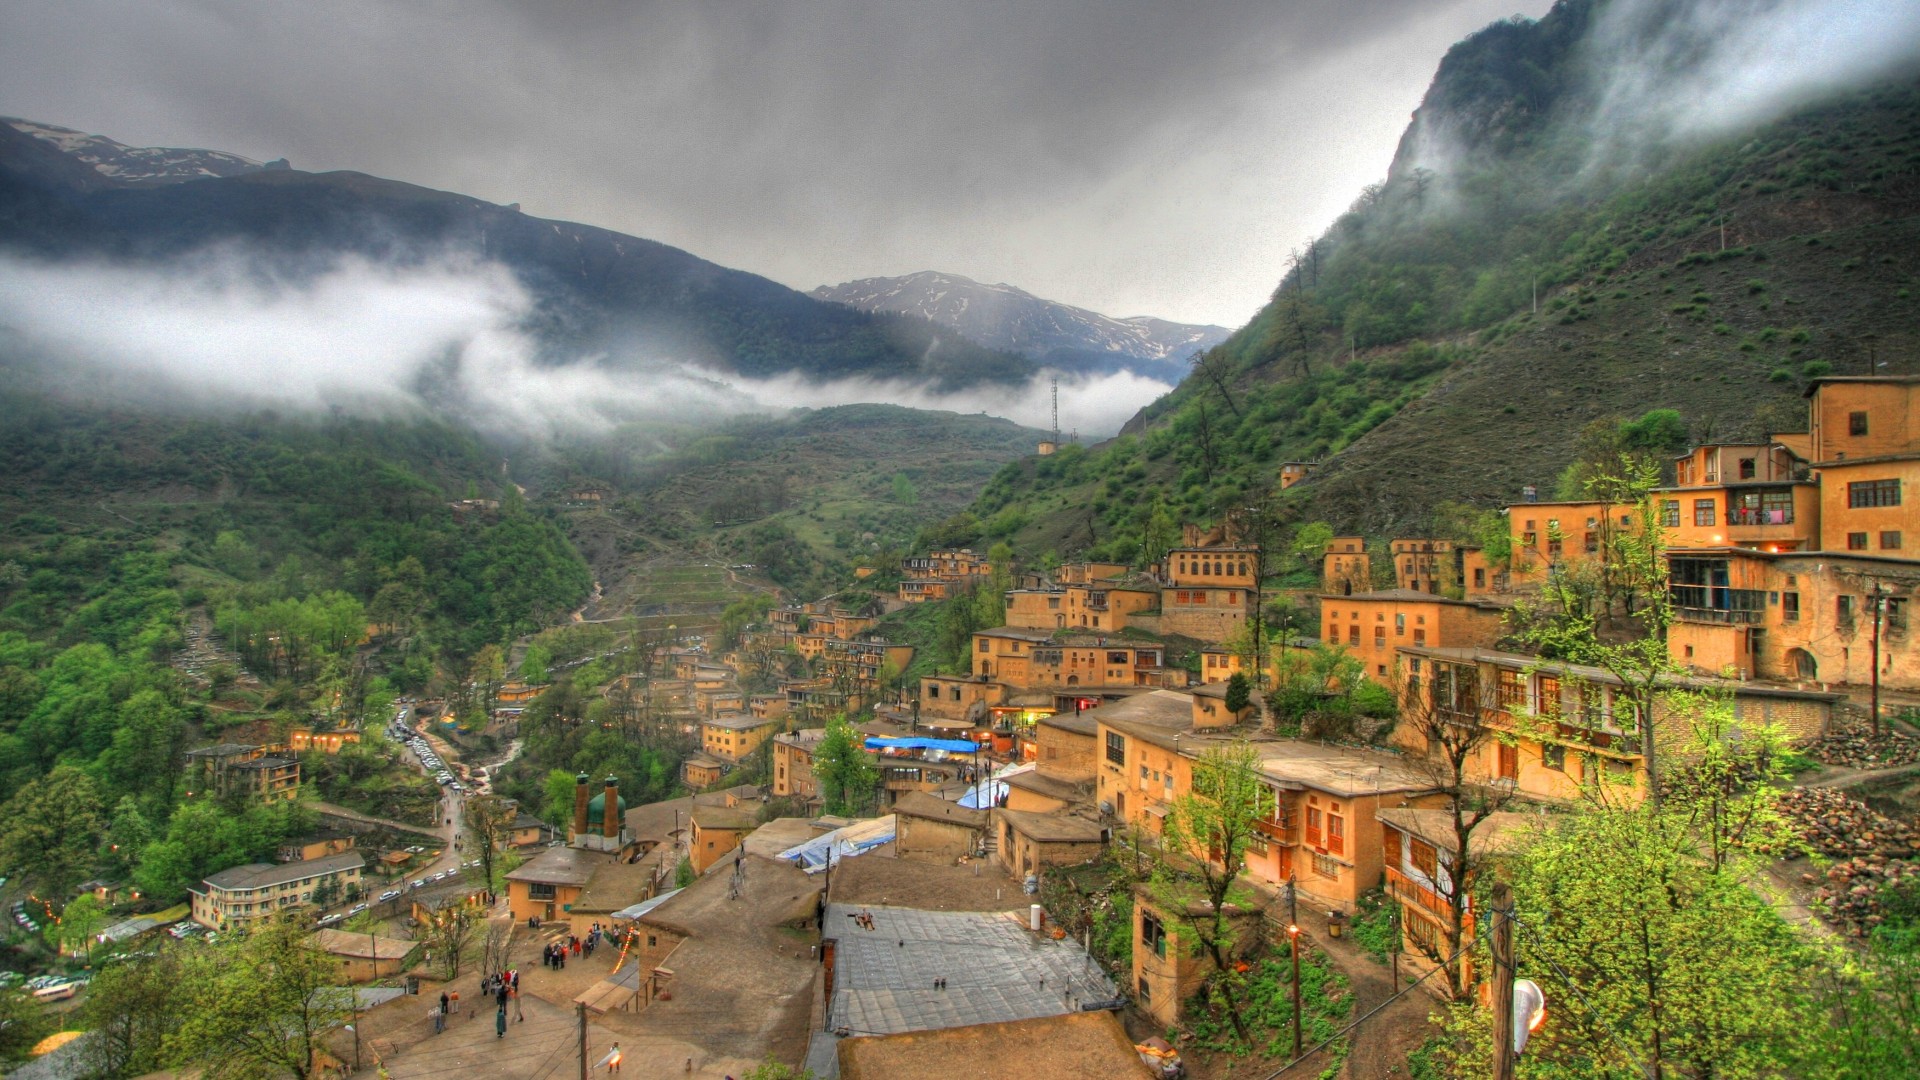 1437201264_a_city_on_a_mountainside_in_iran_hdr_hd_wallpaper_603725.jpg